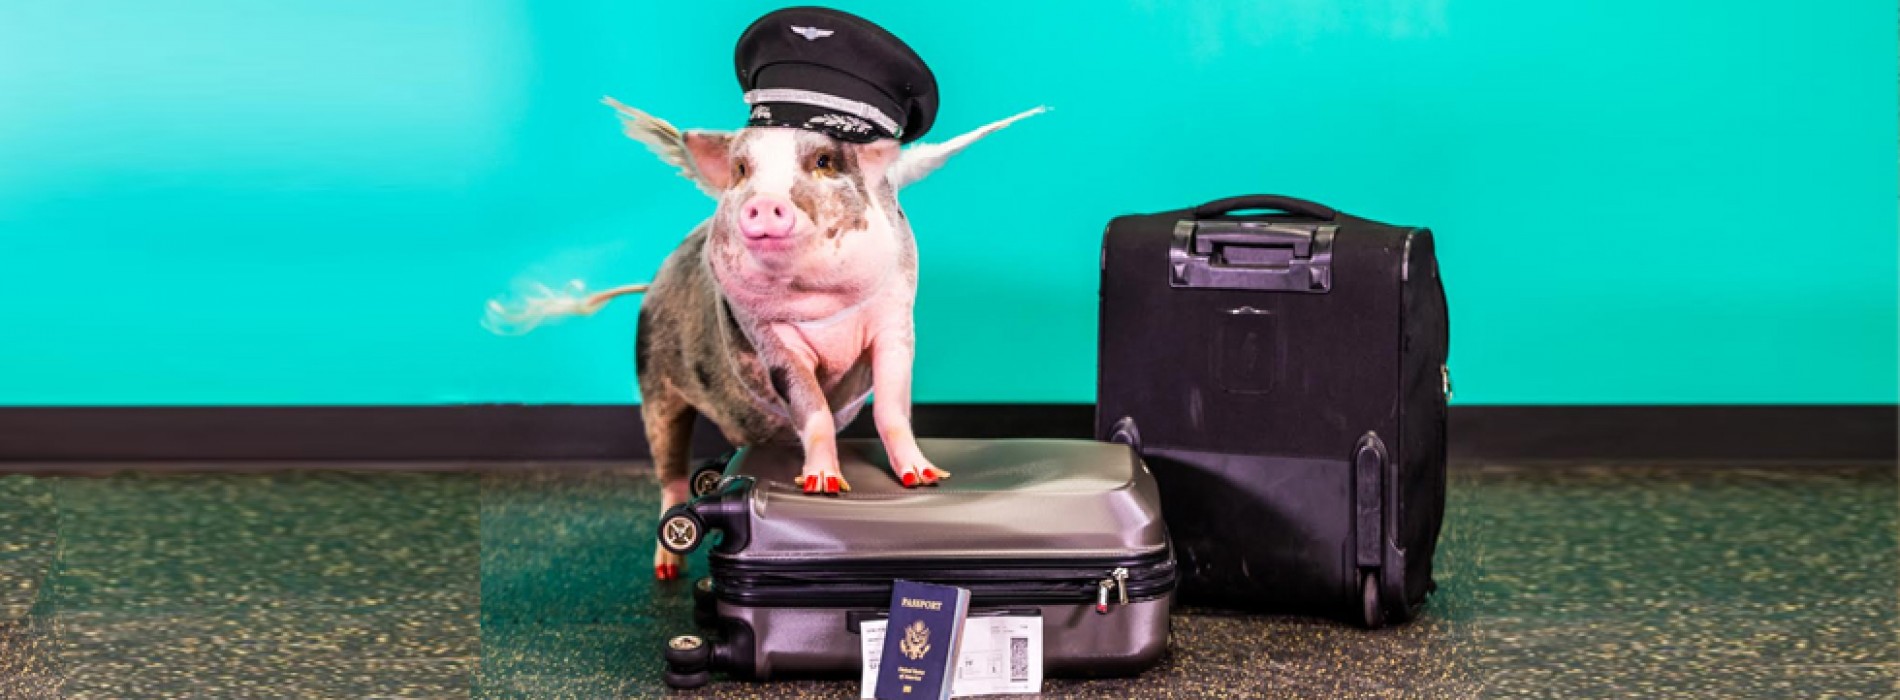 Pigs Fly at SFO: Airport welcomes LiLou to the Wag Brigade